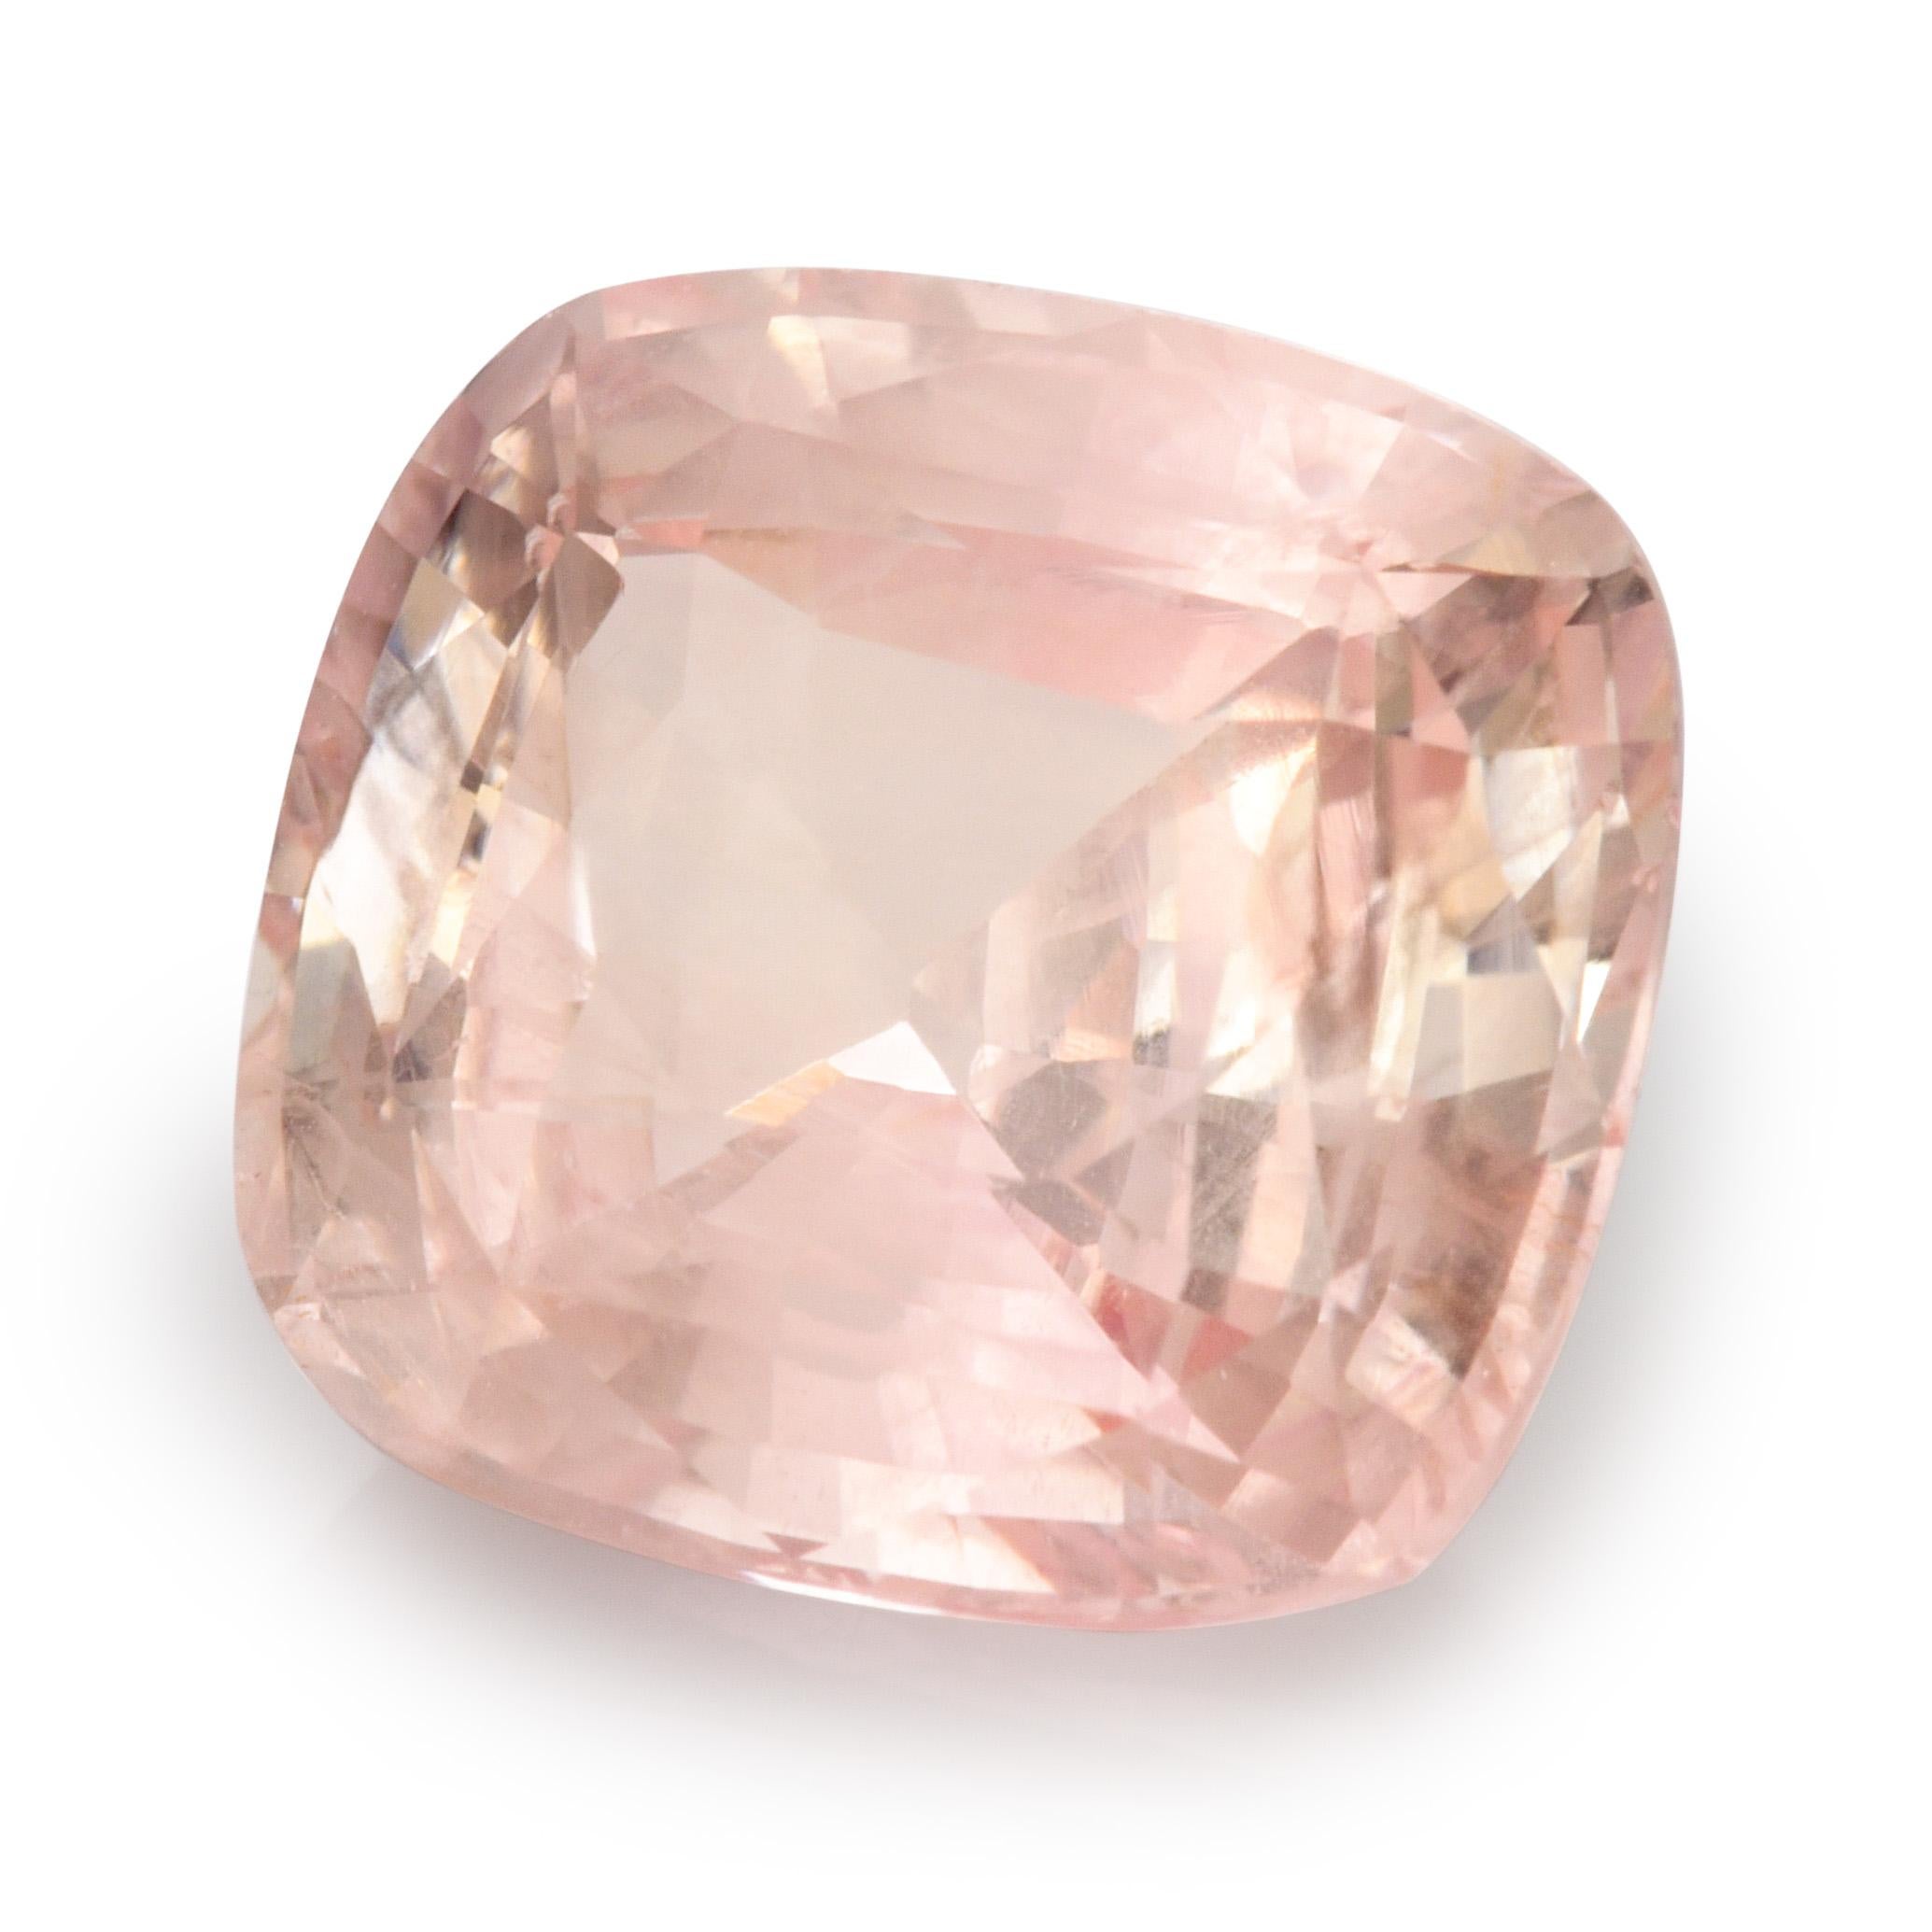 Mixed Cut GIA Certified 3.56 Carats Unheated Padparadscha Sapphire For Sale